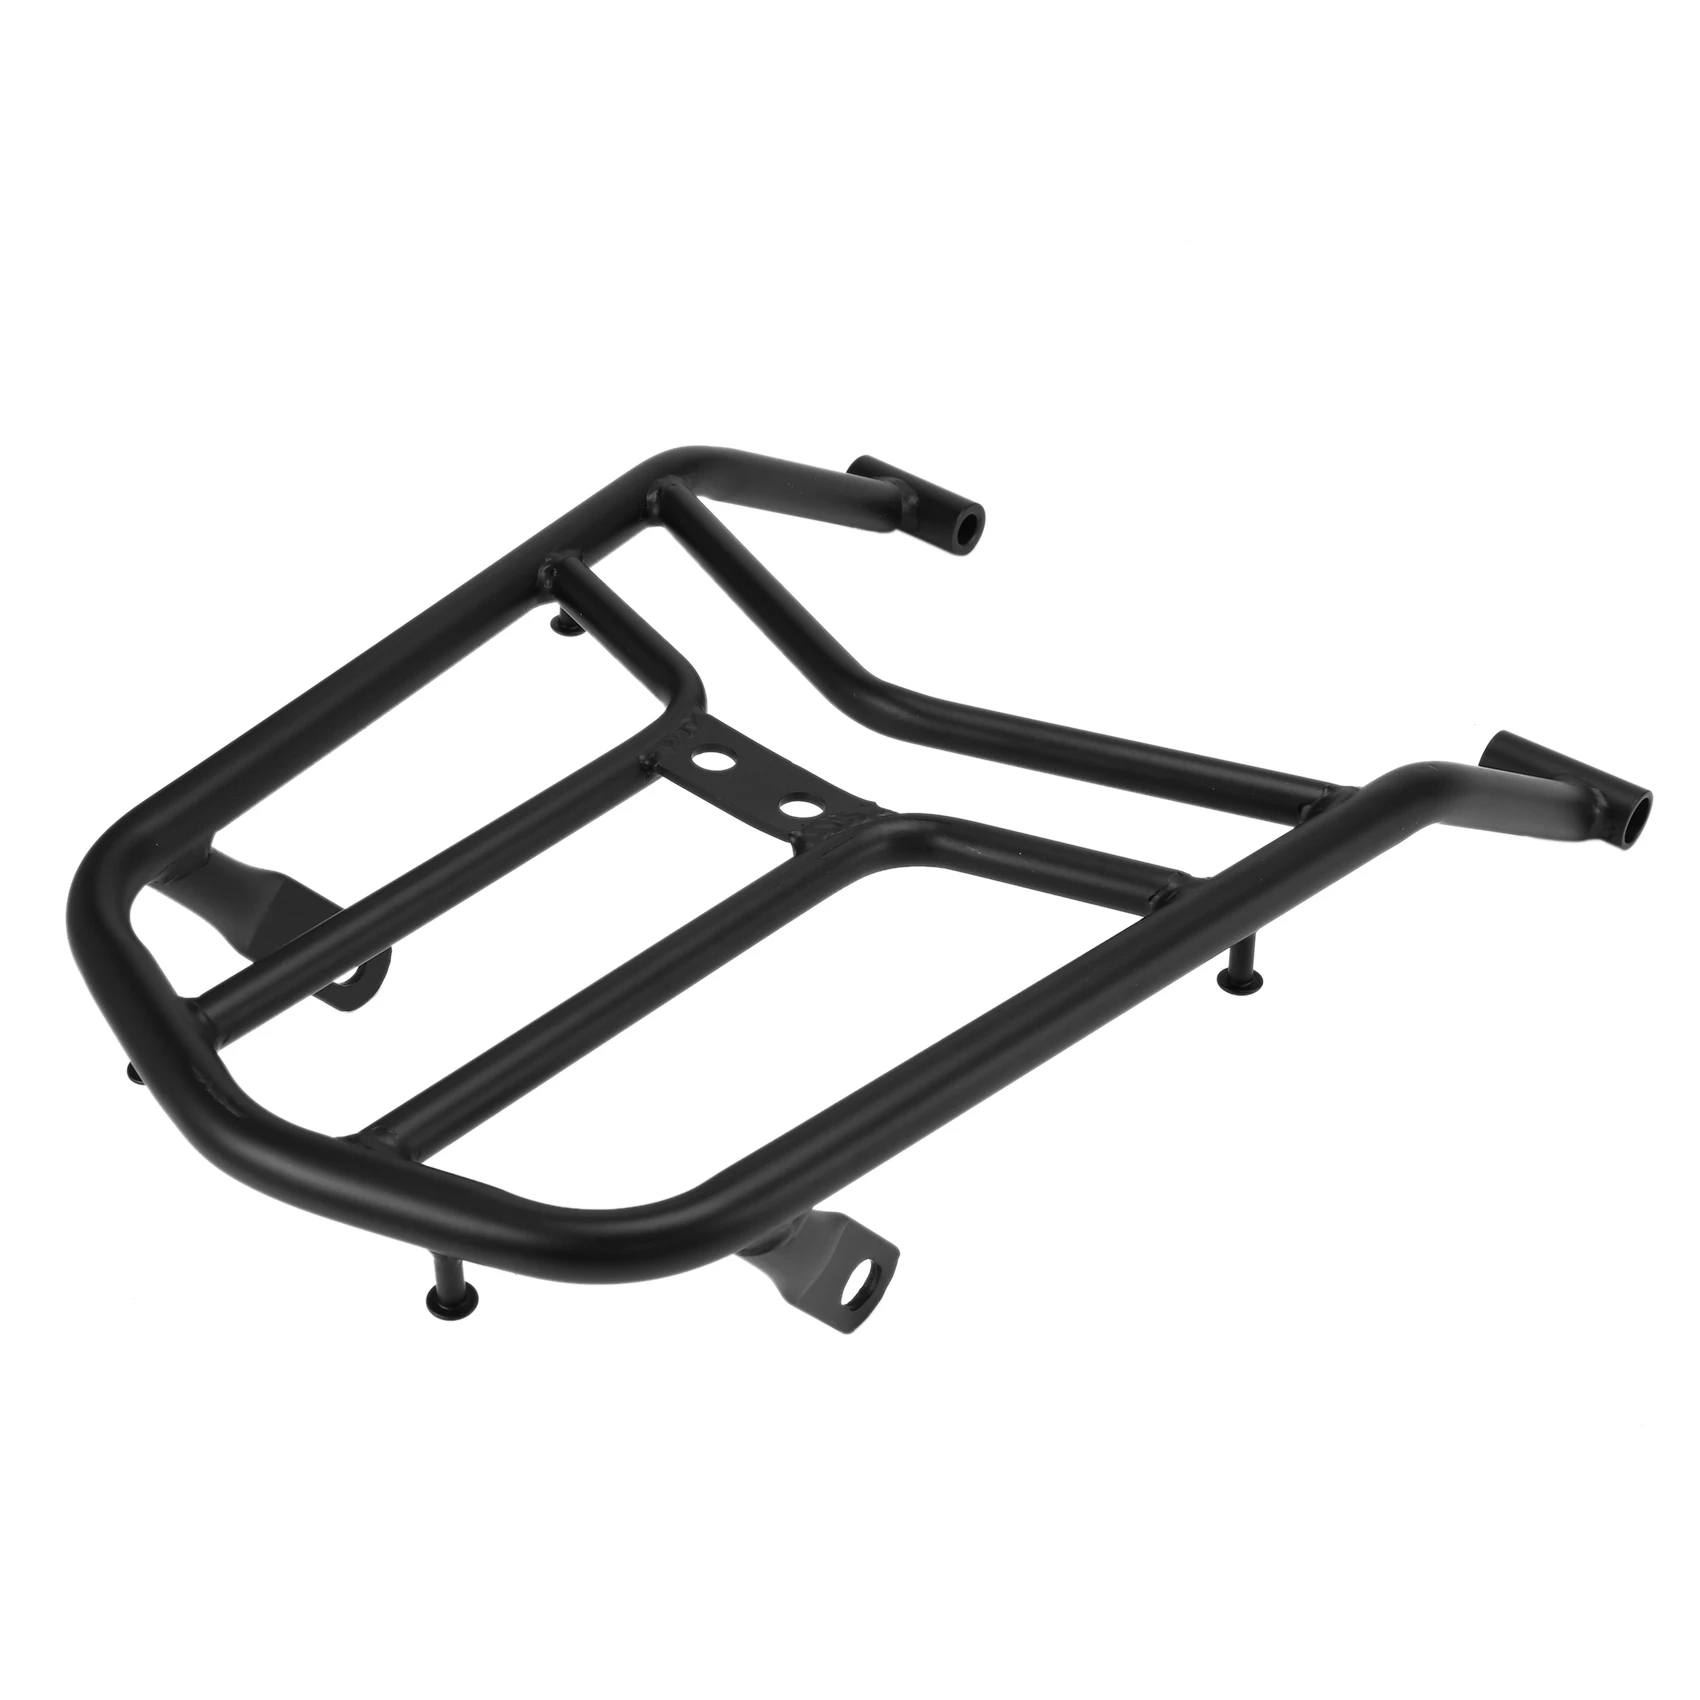 rear-tail-rack-top-box-case-suitcase-carrier-board-for-honda-crf250l-2012-2019-crf250m-13-19-crf250-rally-17-19